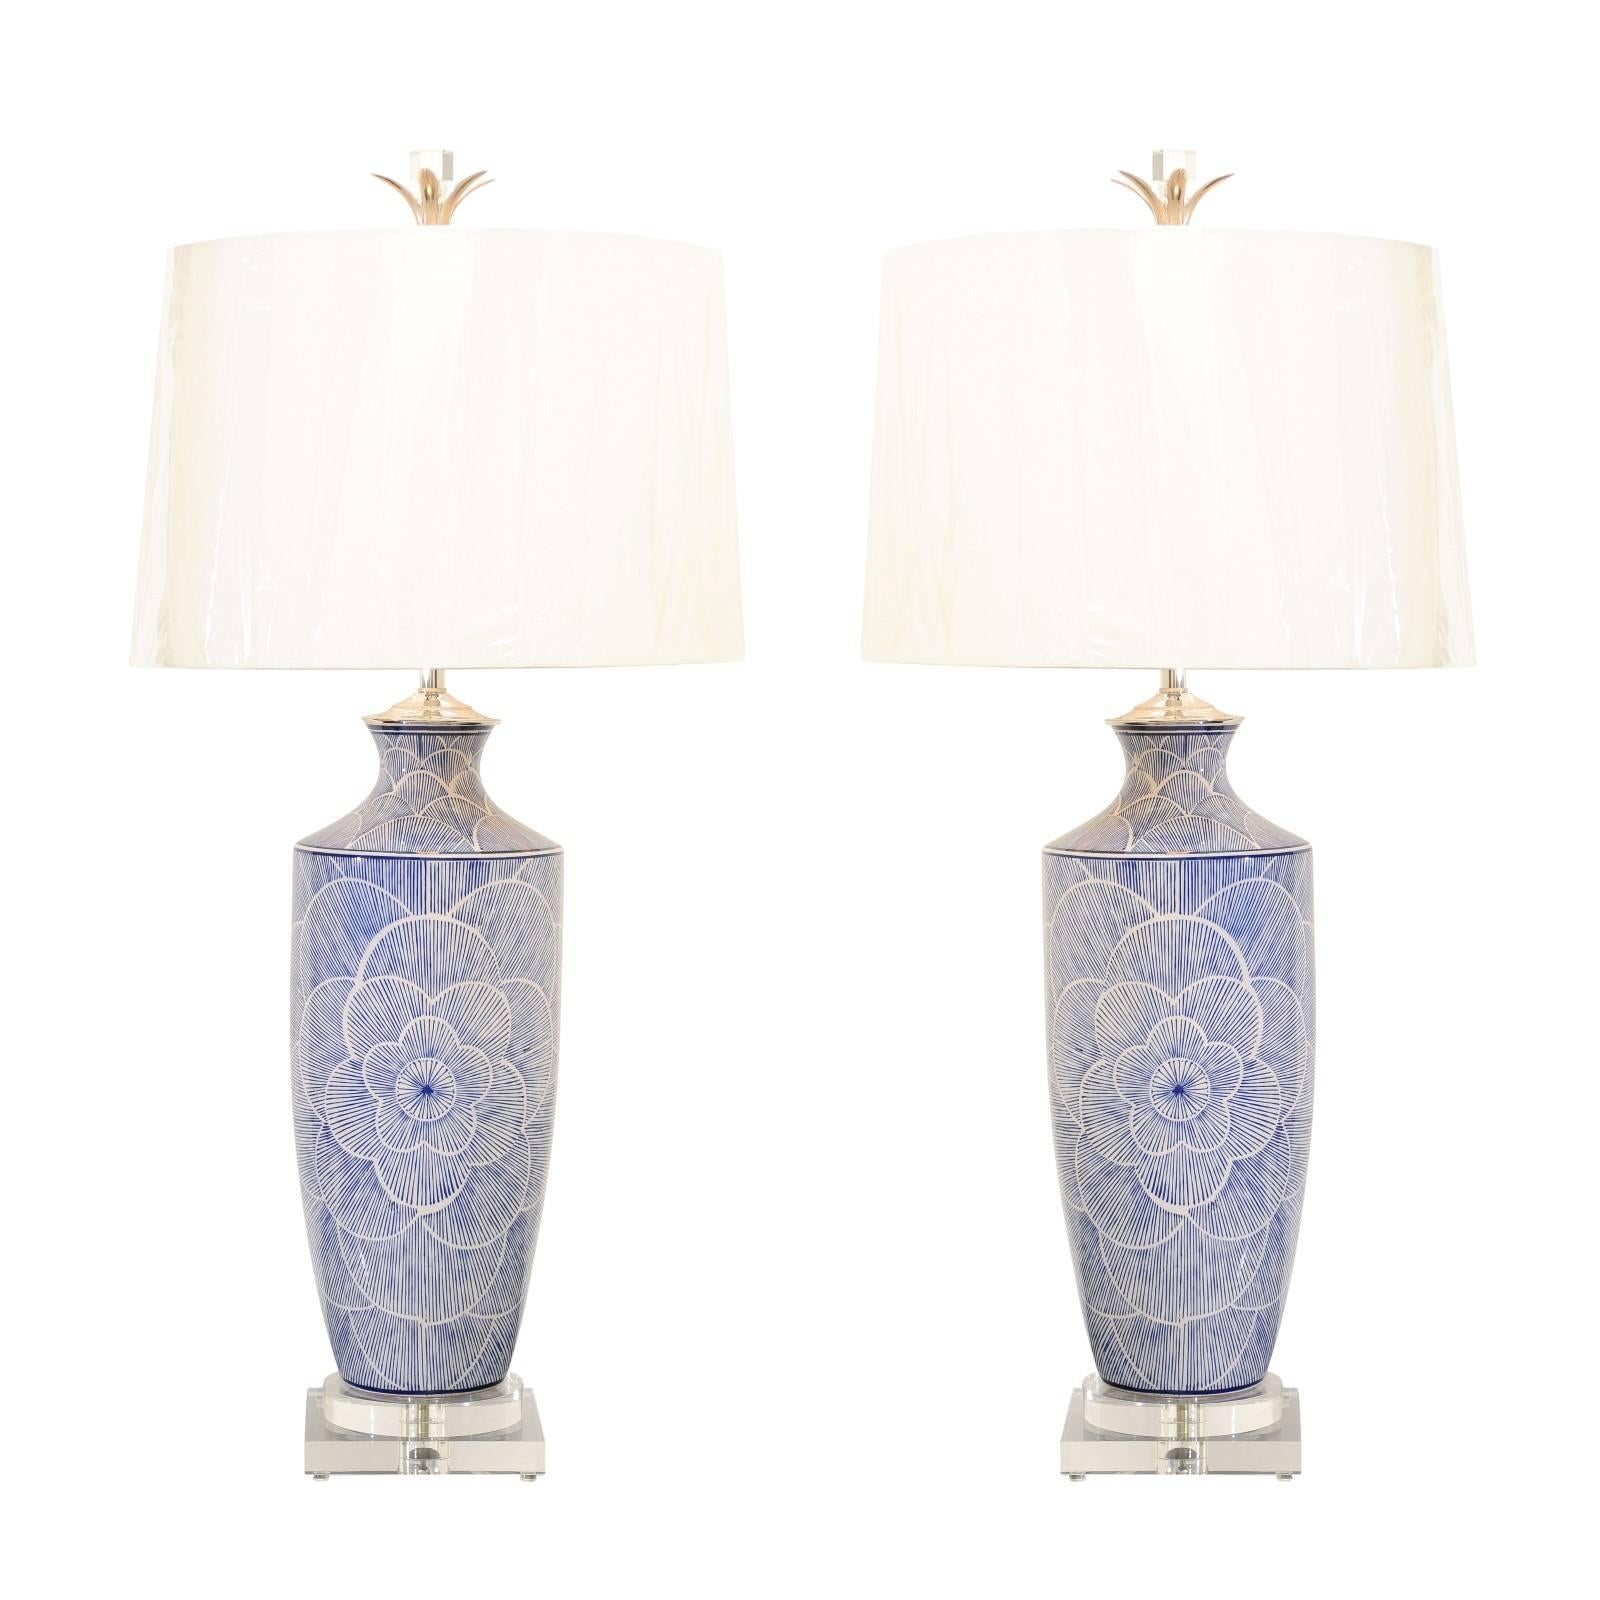 Dramatic Graphic Pair of Large-Scale Ceramic Lamps in Navy and White